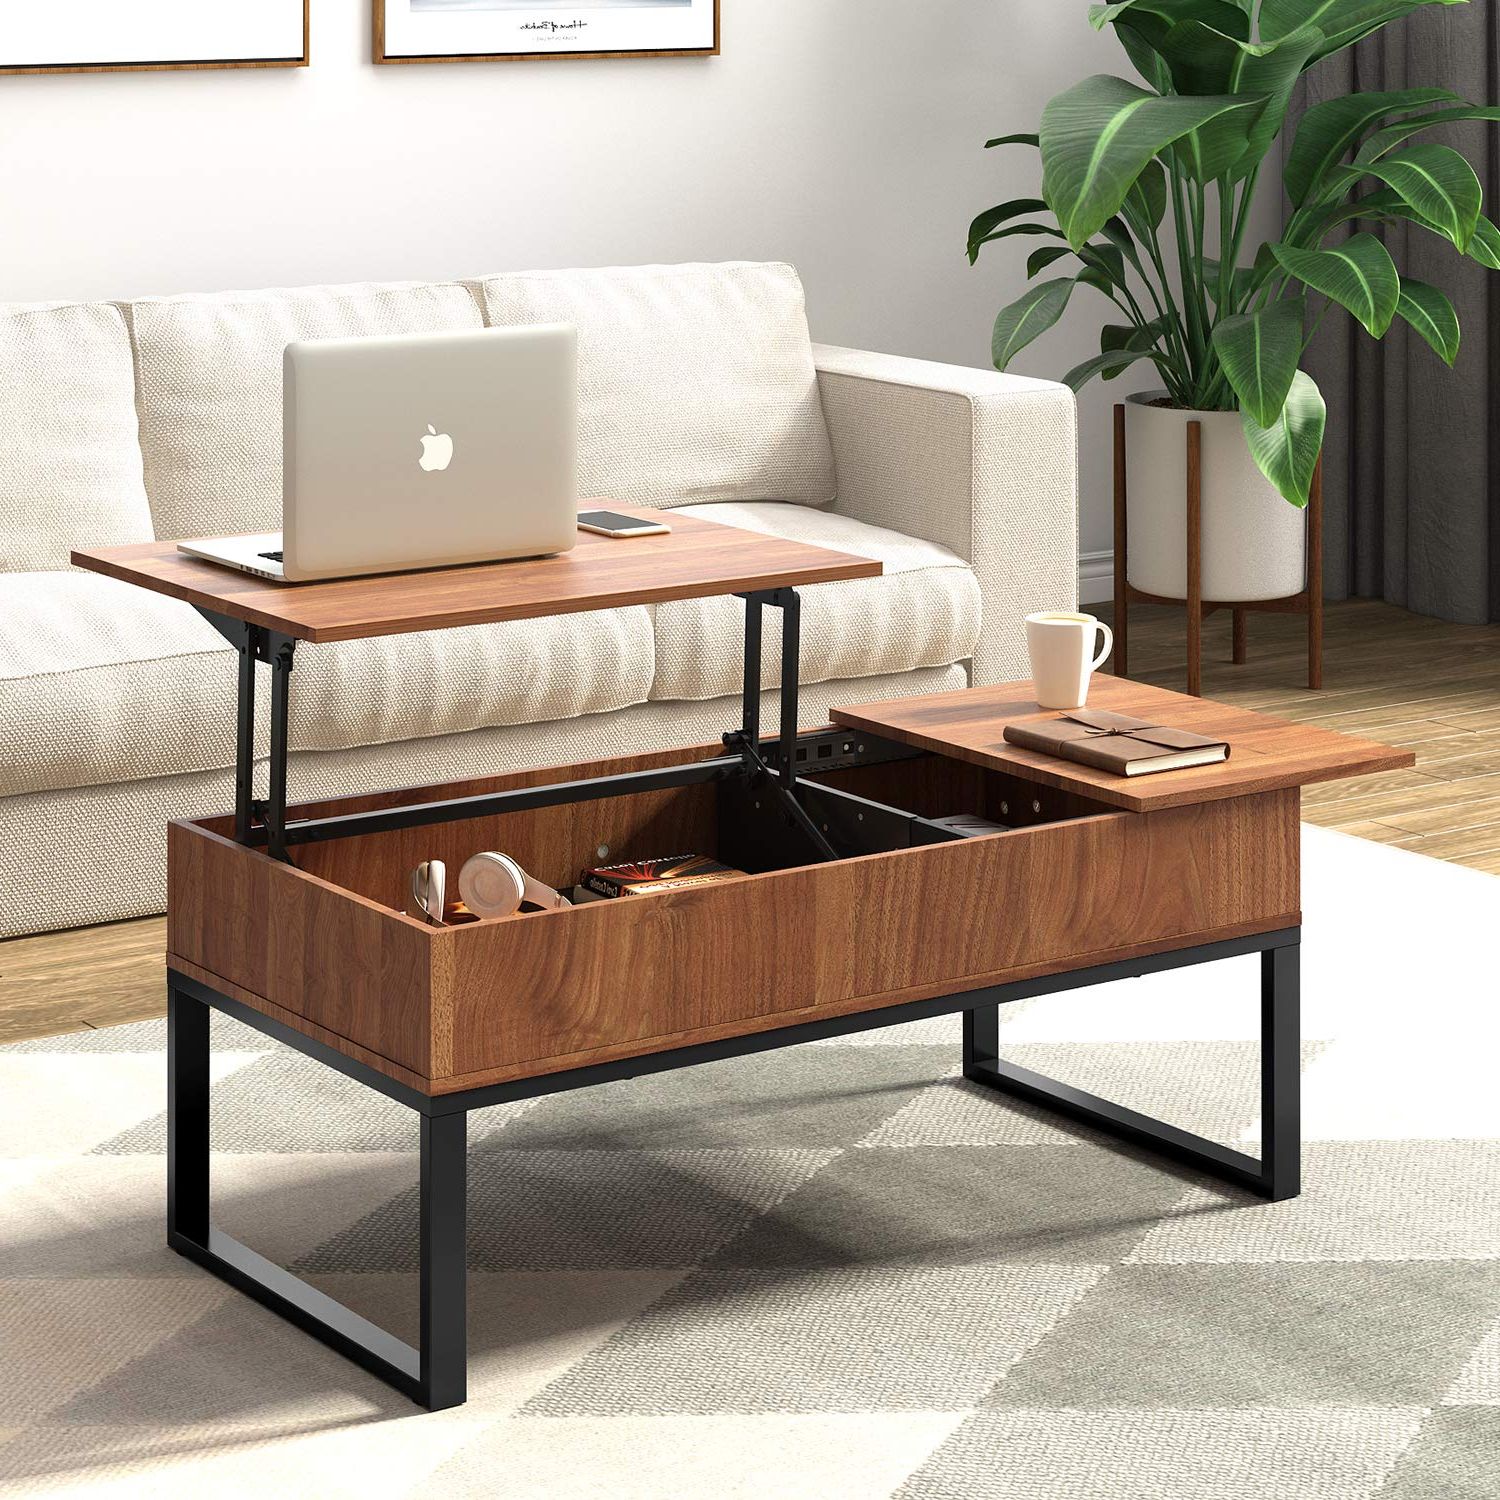 Wlive Wood Coffee Table With Adjustable Lift Top Table, Metal Frame Within Modern Coffee Tables With Hidden Storage Compartments (View 13 of 20)